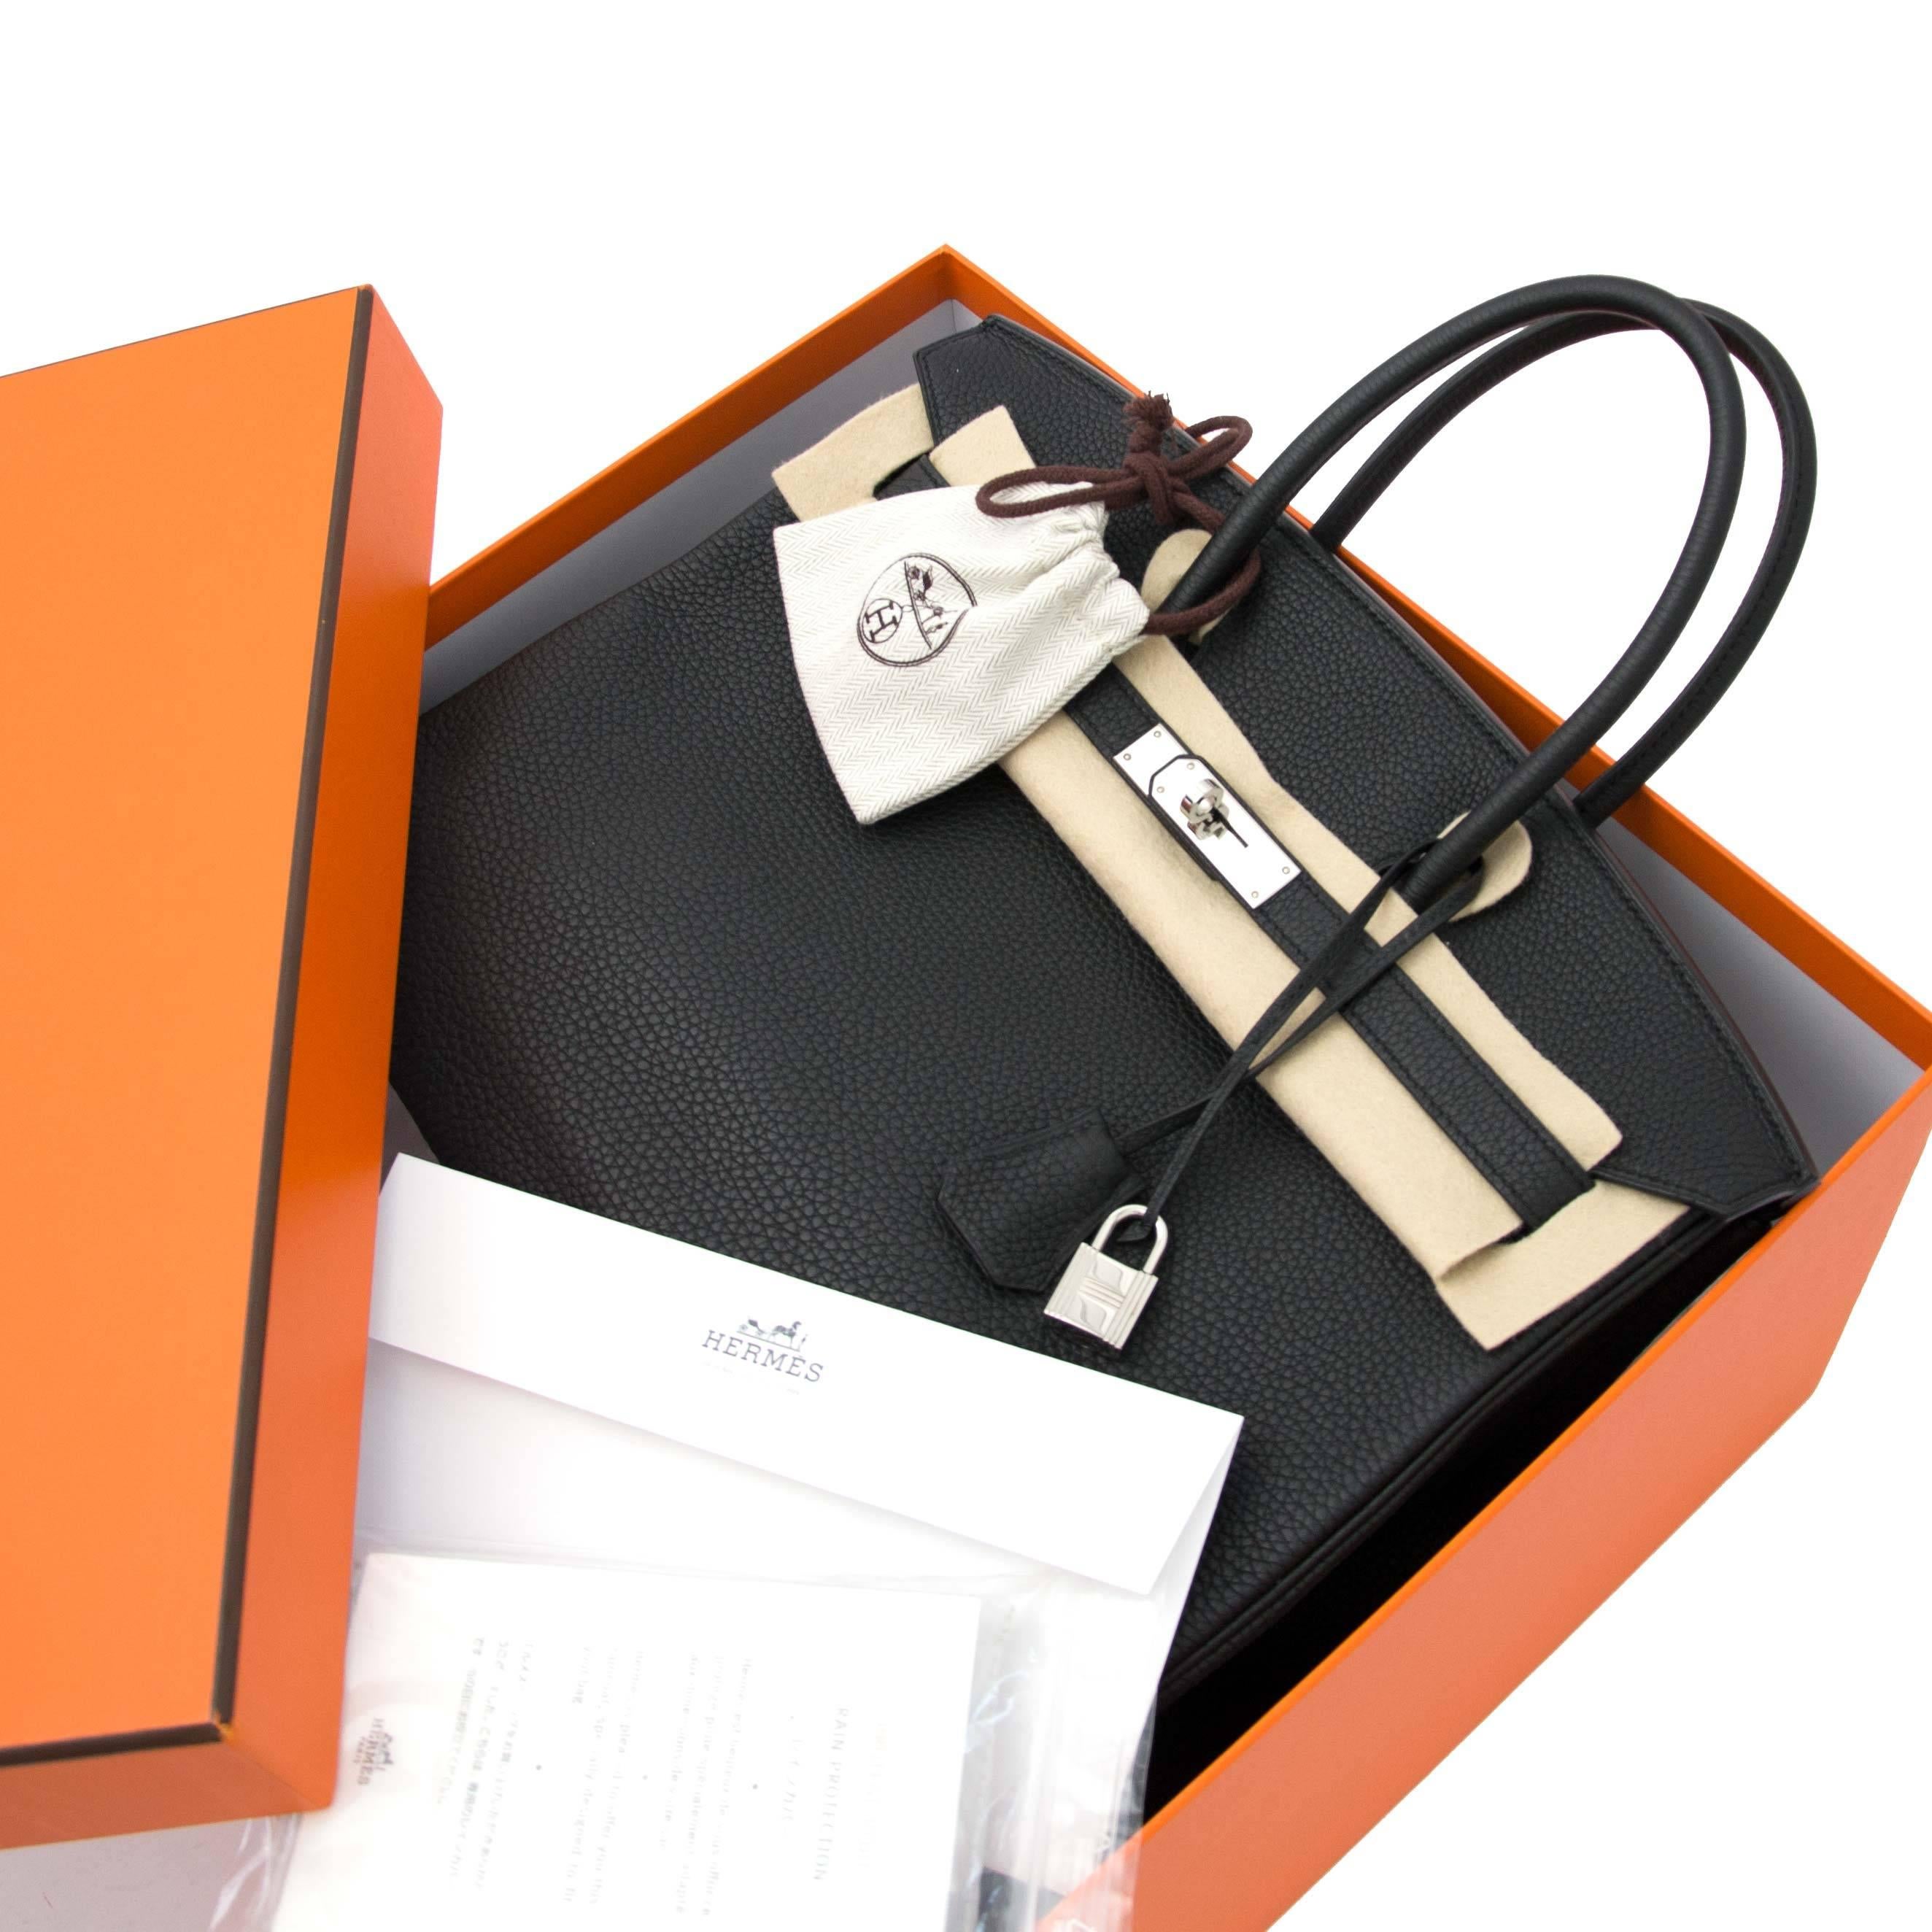 Very nice preloved condition

Hermès Birkin 35 Togo Black PHW

This Hermès Birkin bag comes in a black colored Togo leather featuring palladium hardware which finishes off the look.

Togo is known for its smooth, fine grained leather that is light